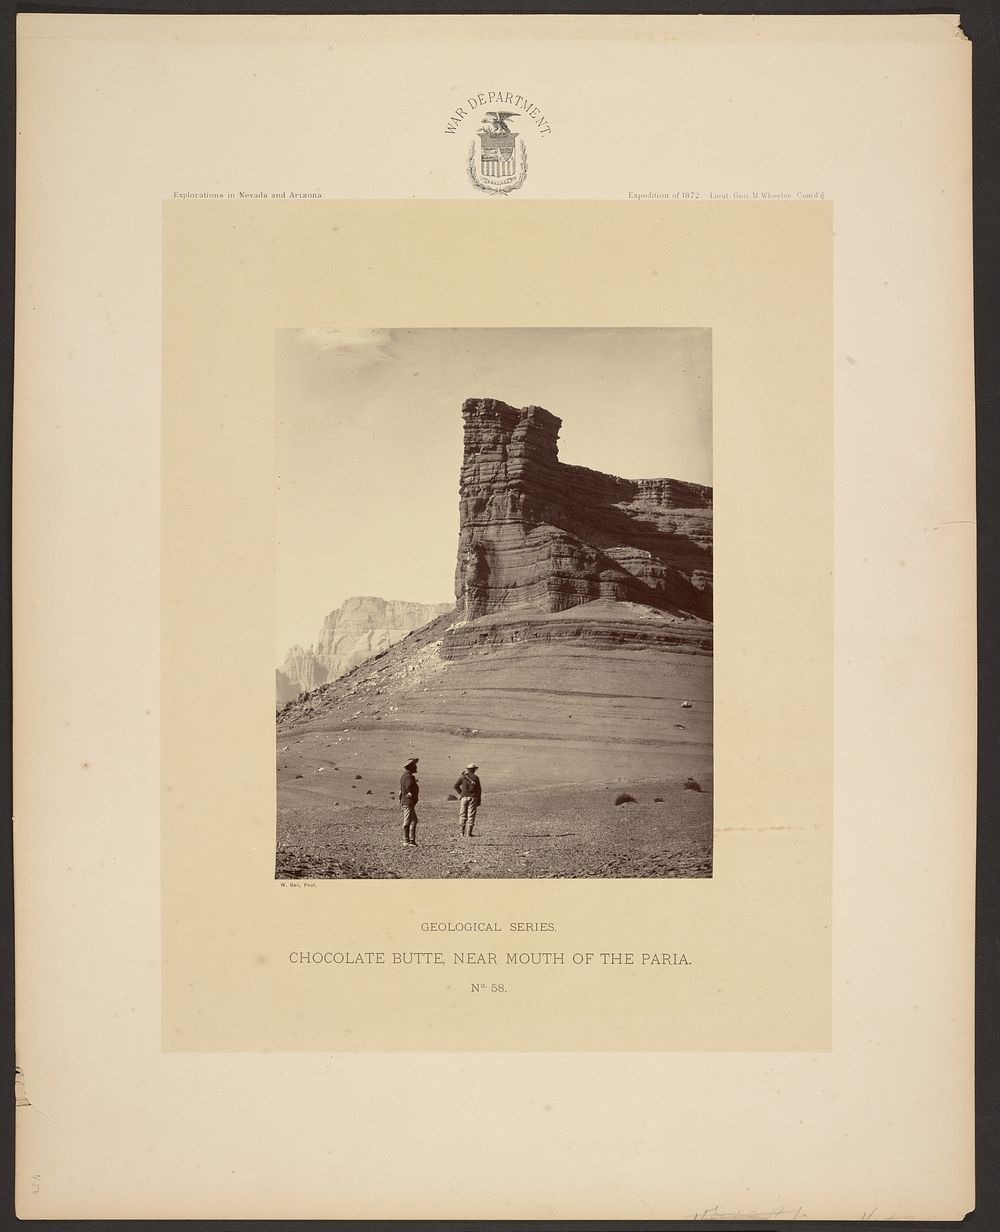 Chocolate Butte, Near Mouth of the Paria by William H Bell